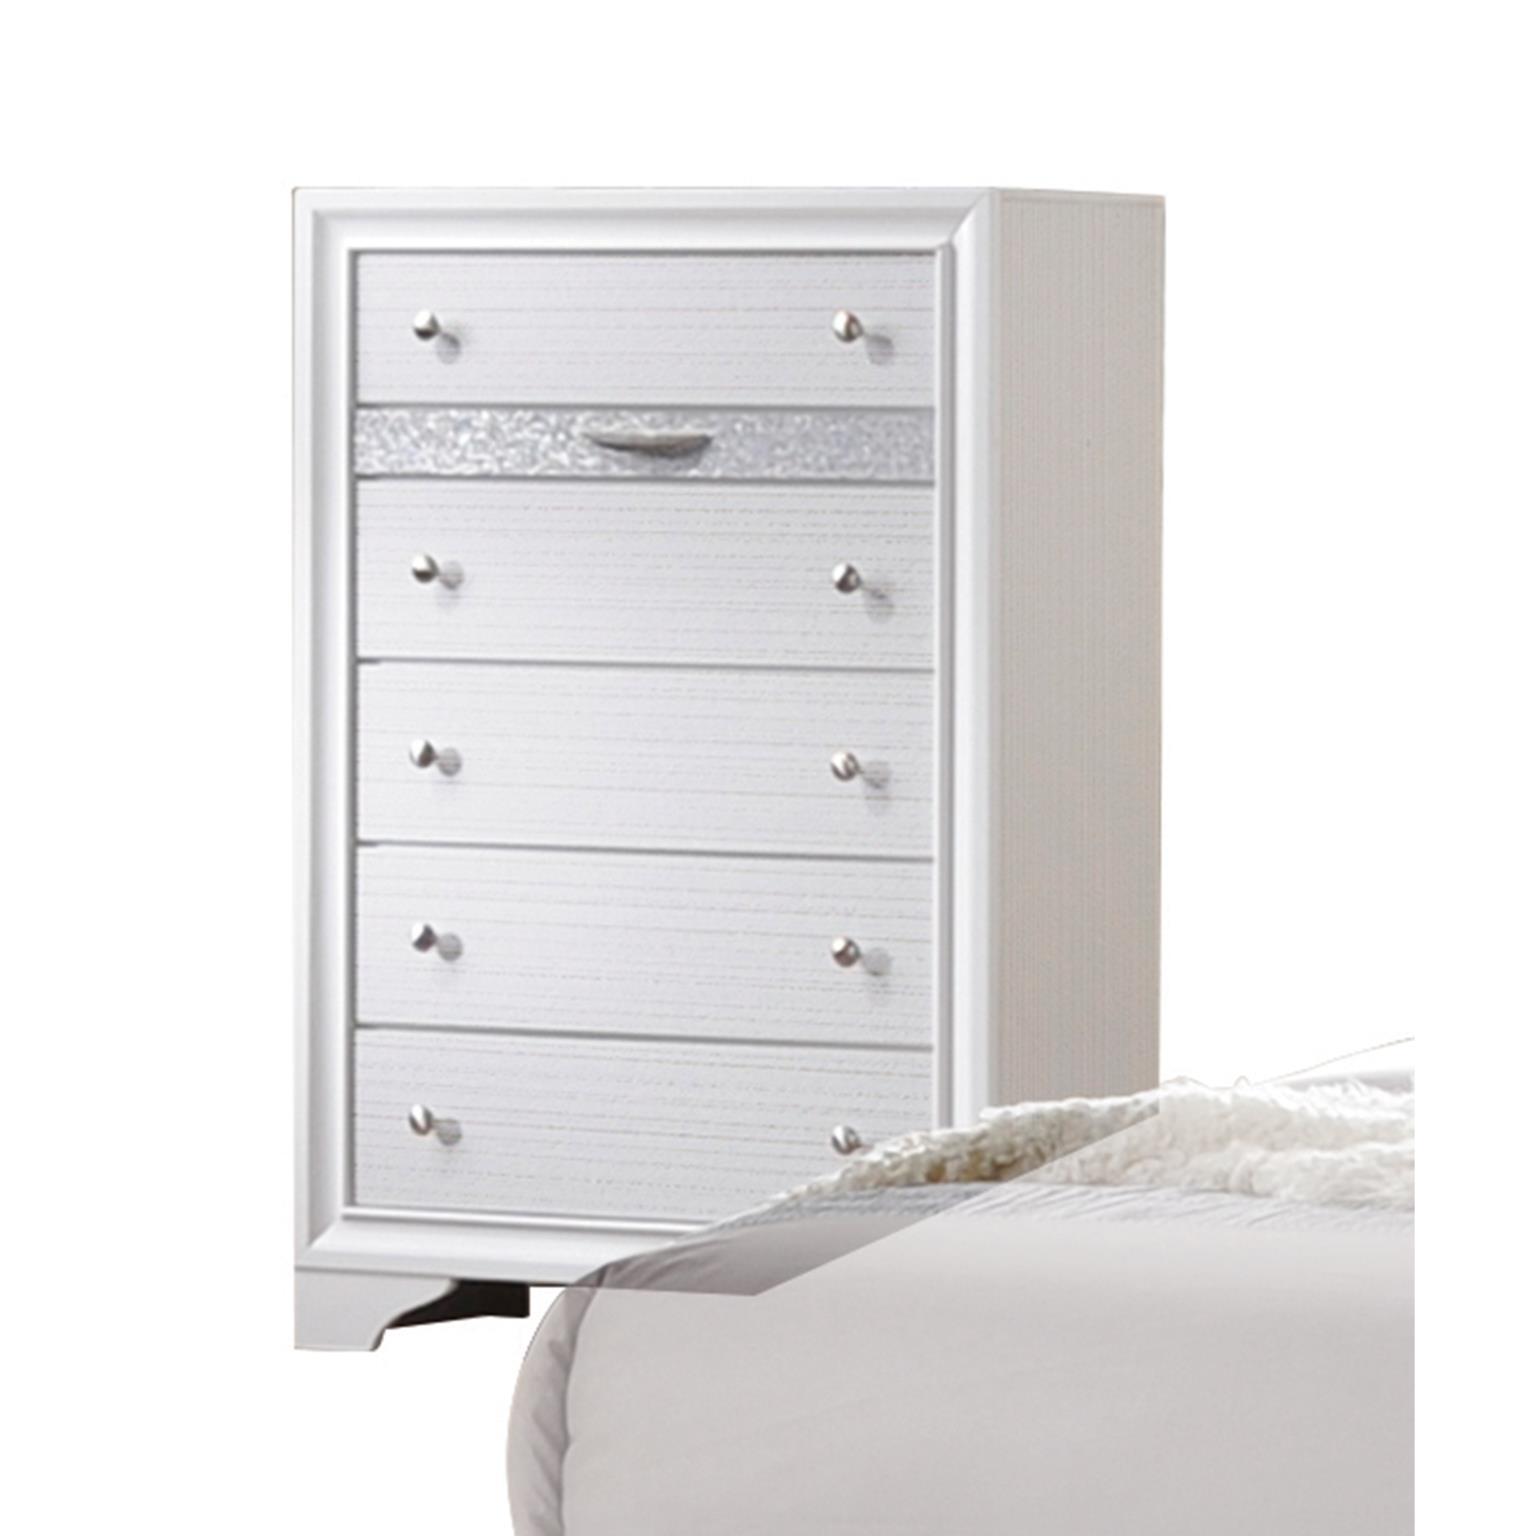 

    
White Finish Wood Queen Bedroom w/Storage 5Pcs Contemporary Naima-25770Q  Acme
